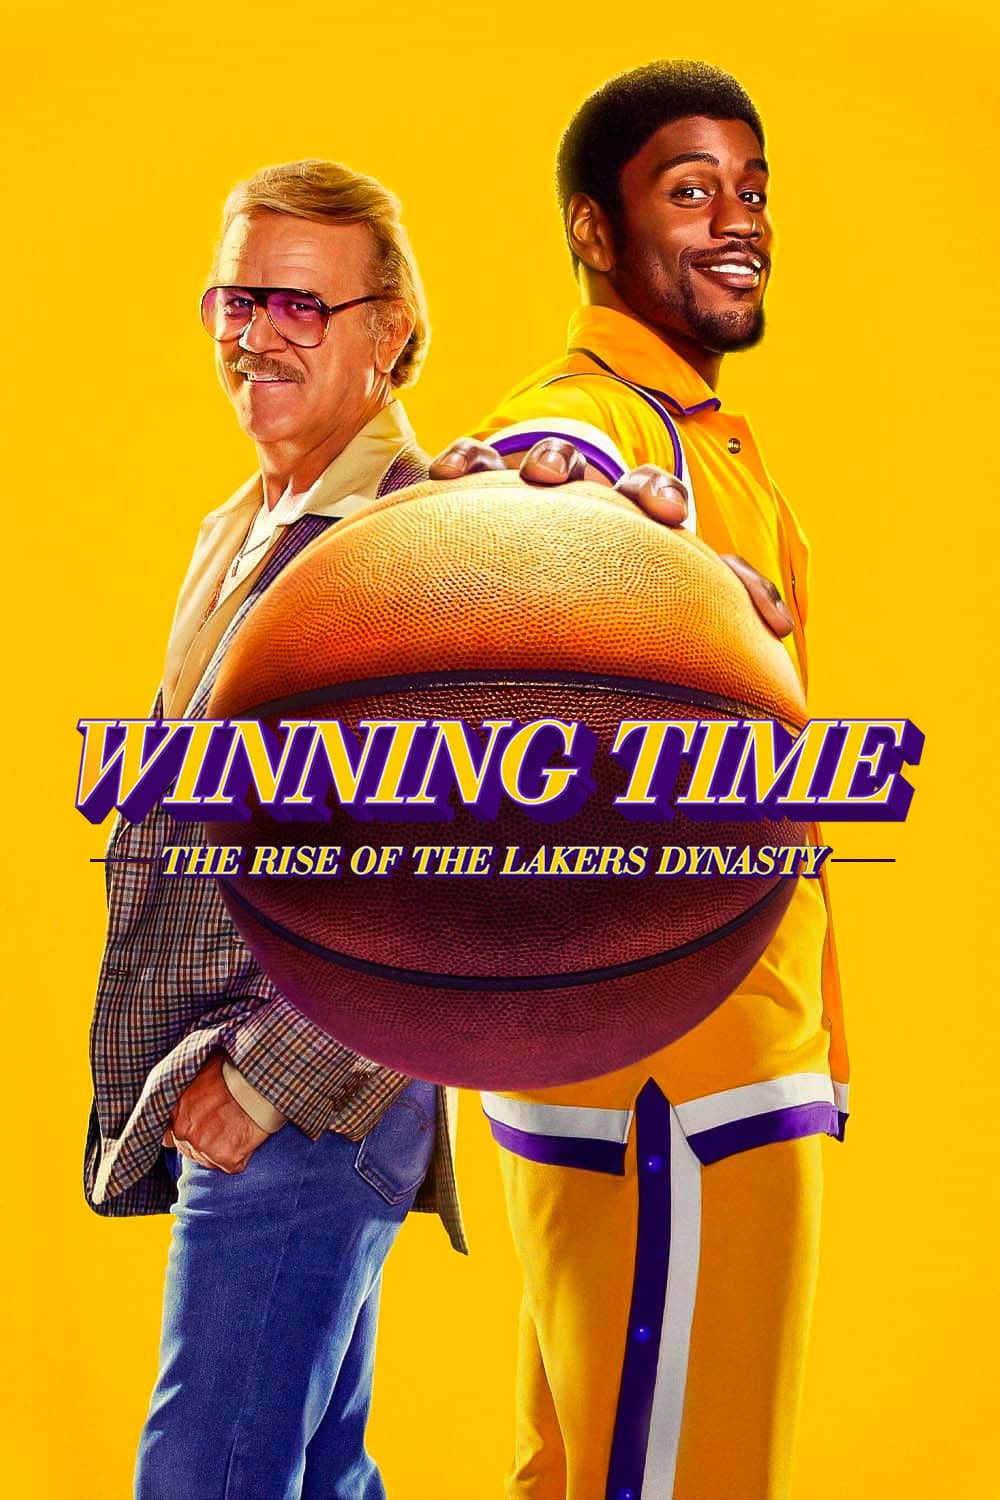 Winning Time: The Rise of the Lakers Dynasty - Série TV 2022 streaming VF gratuit complet